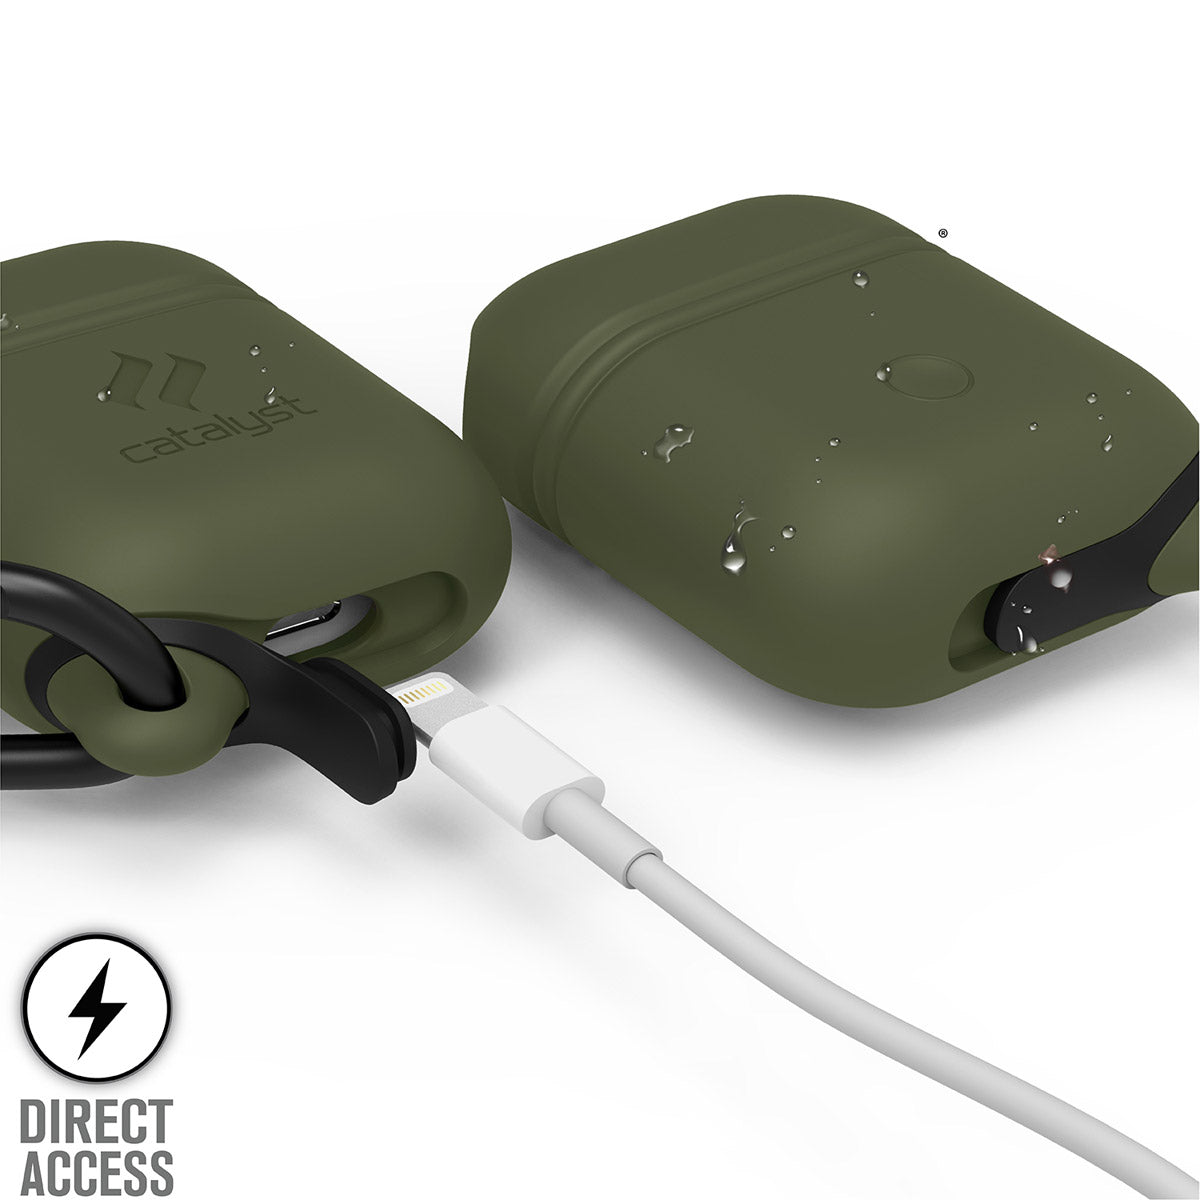 CATAPDGRN-FBA | Catalyst airpods gen2/1 waterproof case + carabiner showing the front and back with lightning port in army green text reads direct access